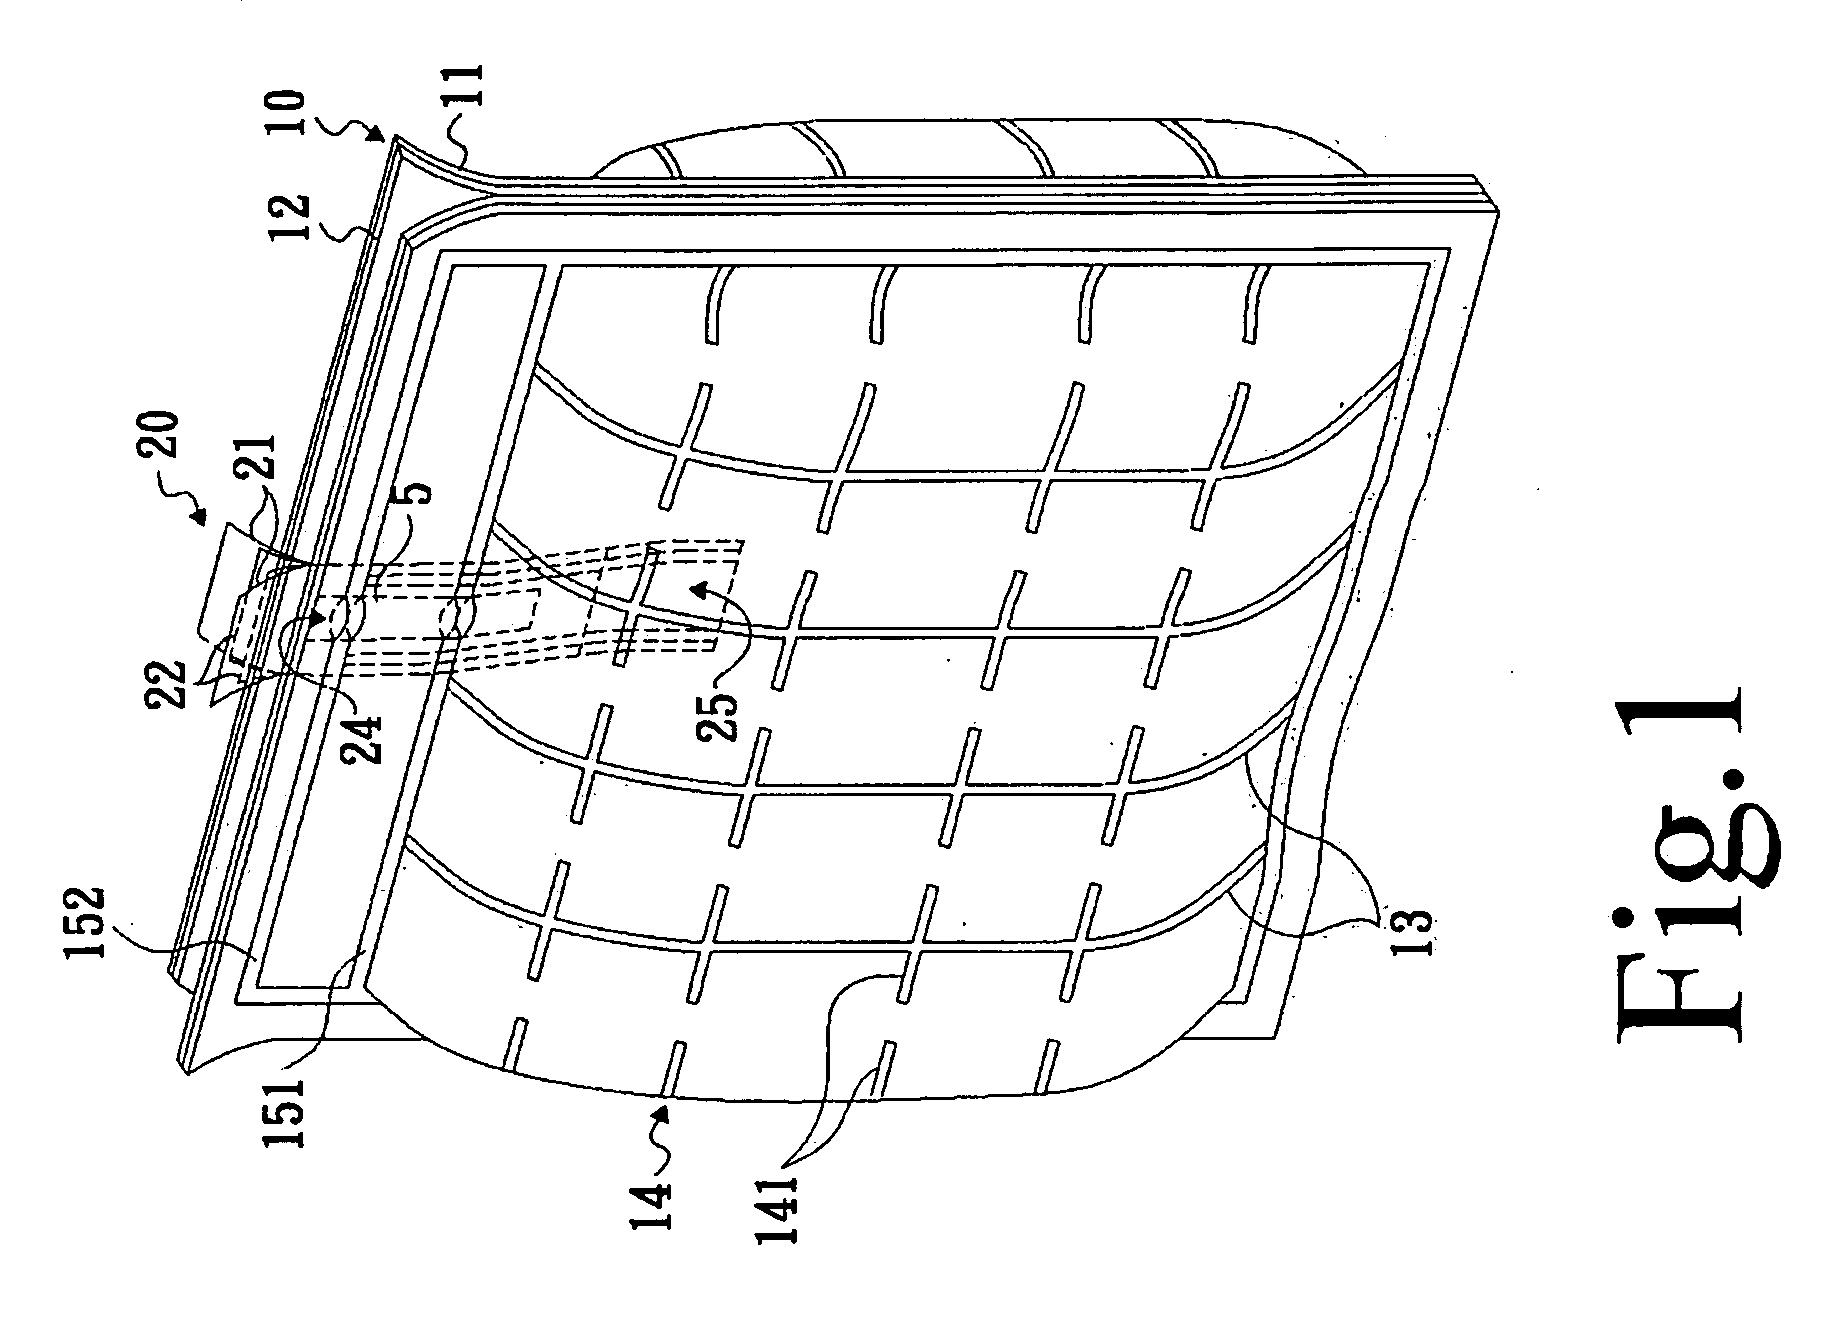 Air filling bag with outer film strengthening structure